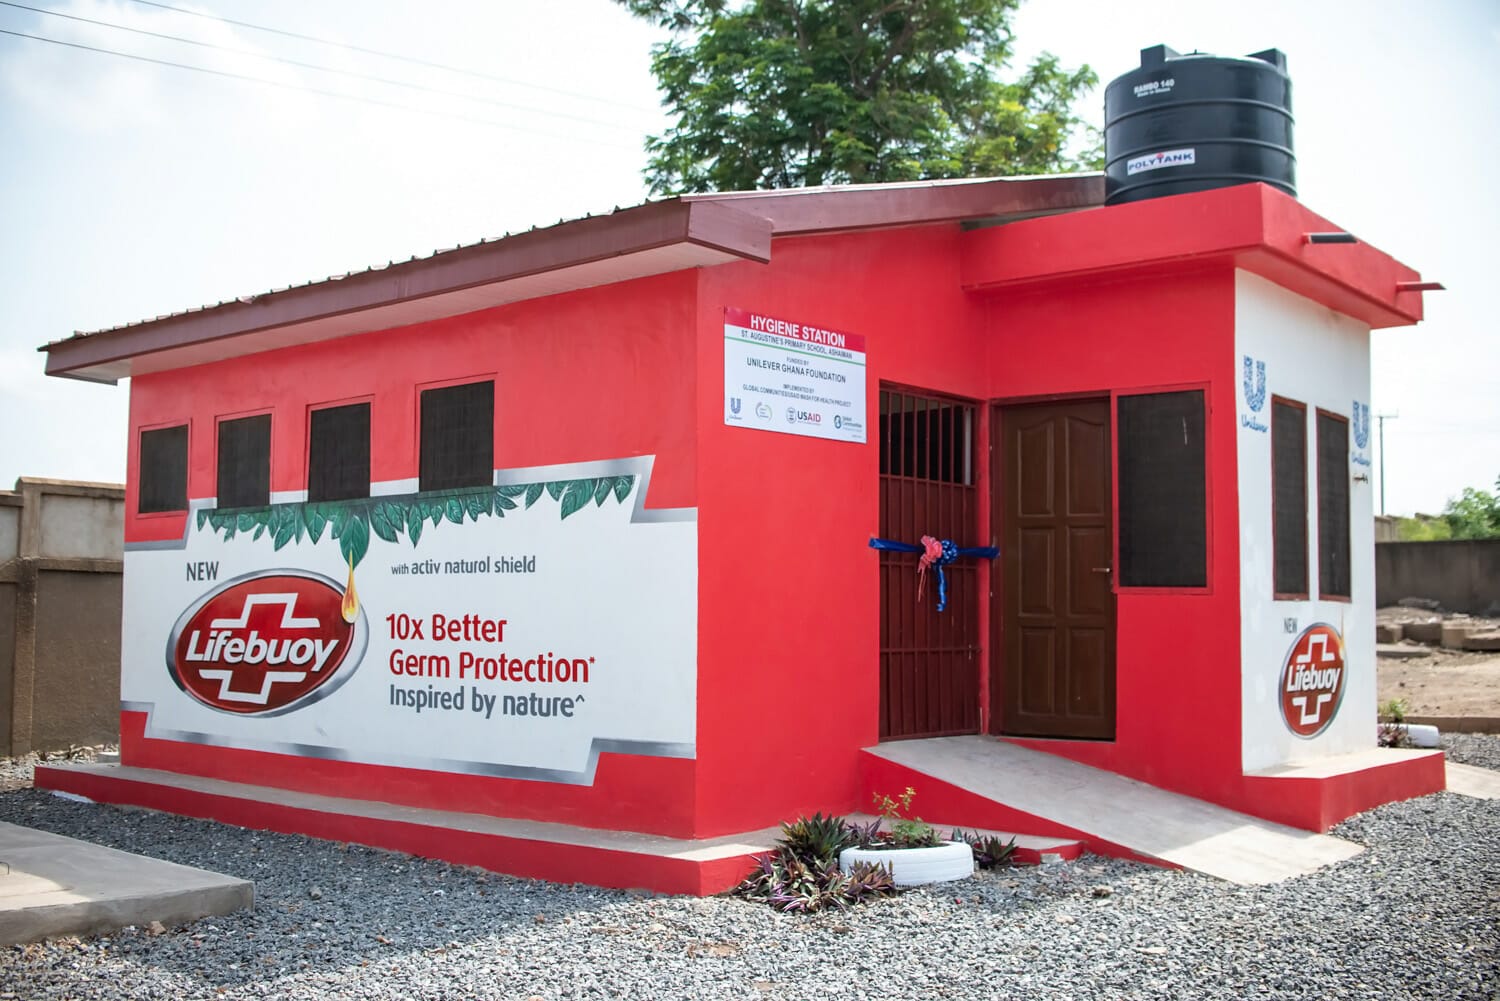 An-8-seater-washroom-facility-constructed-for-St.-Augustine-Primary-School-under-the-Unilever-partnership